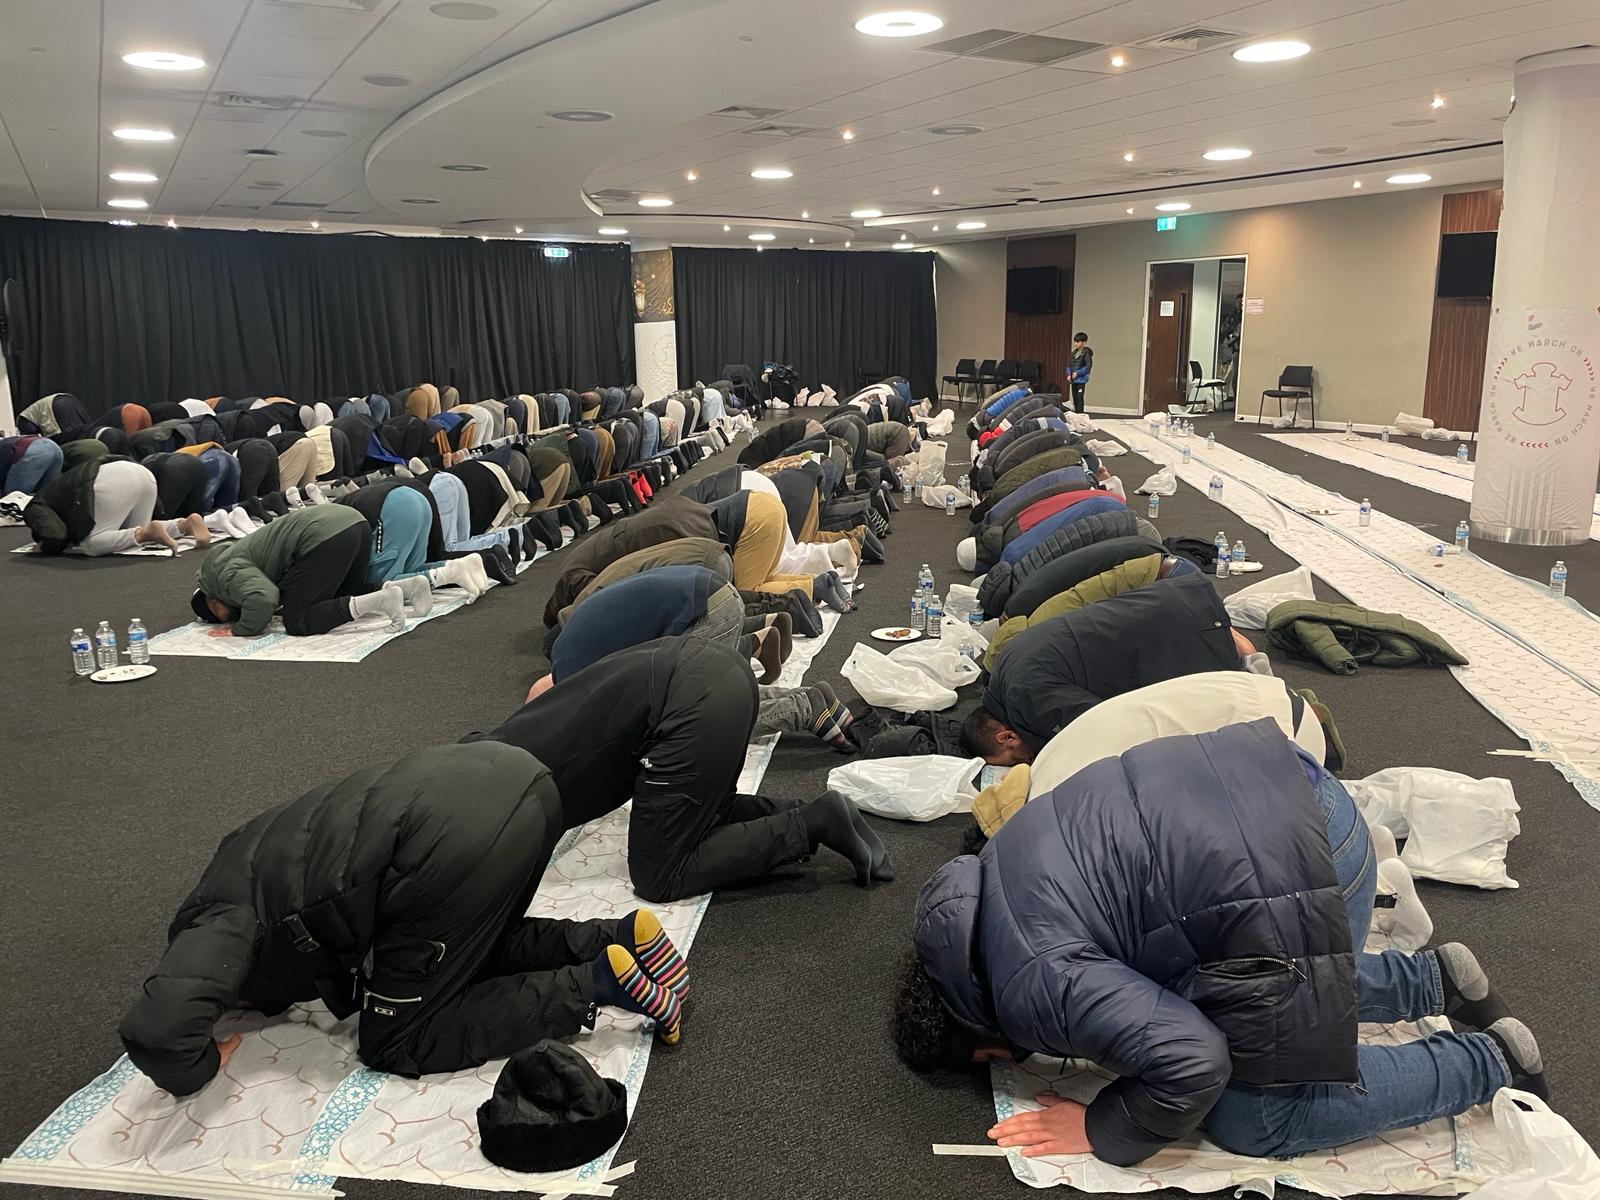 Muslims gather at St Mary's Stadium in Southampton for Iftar